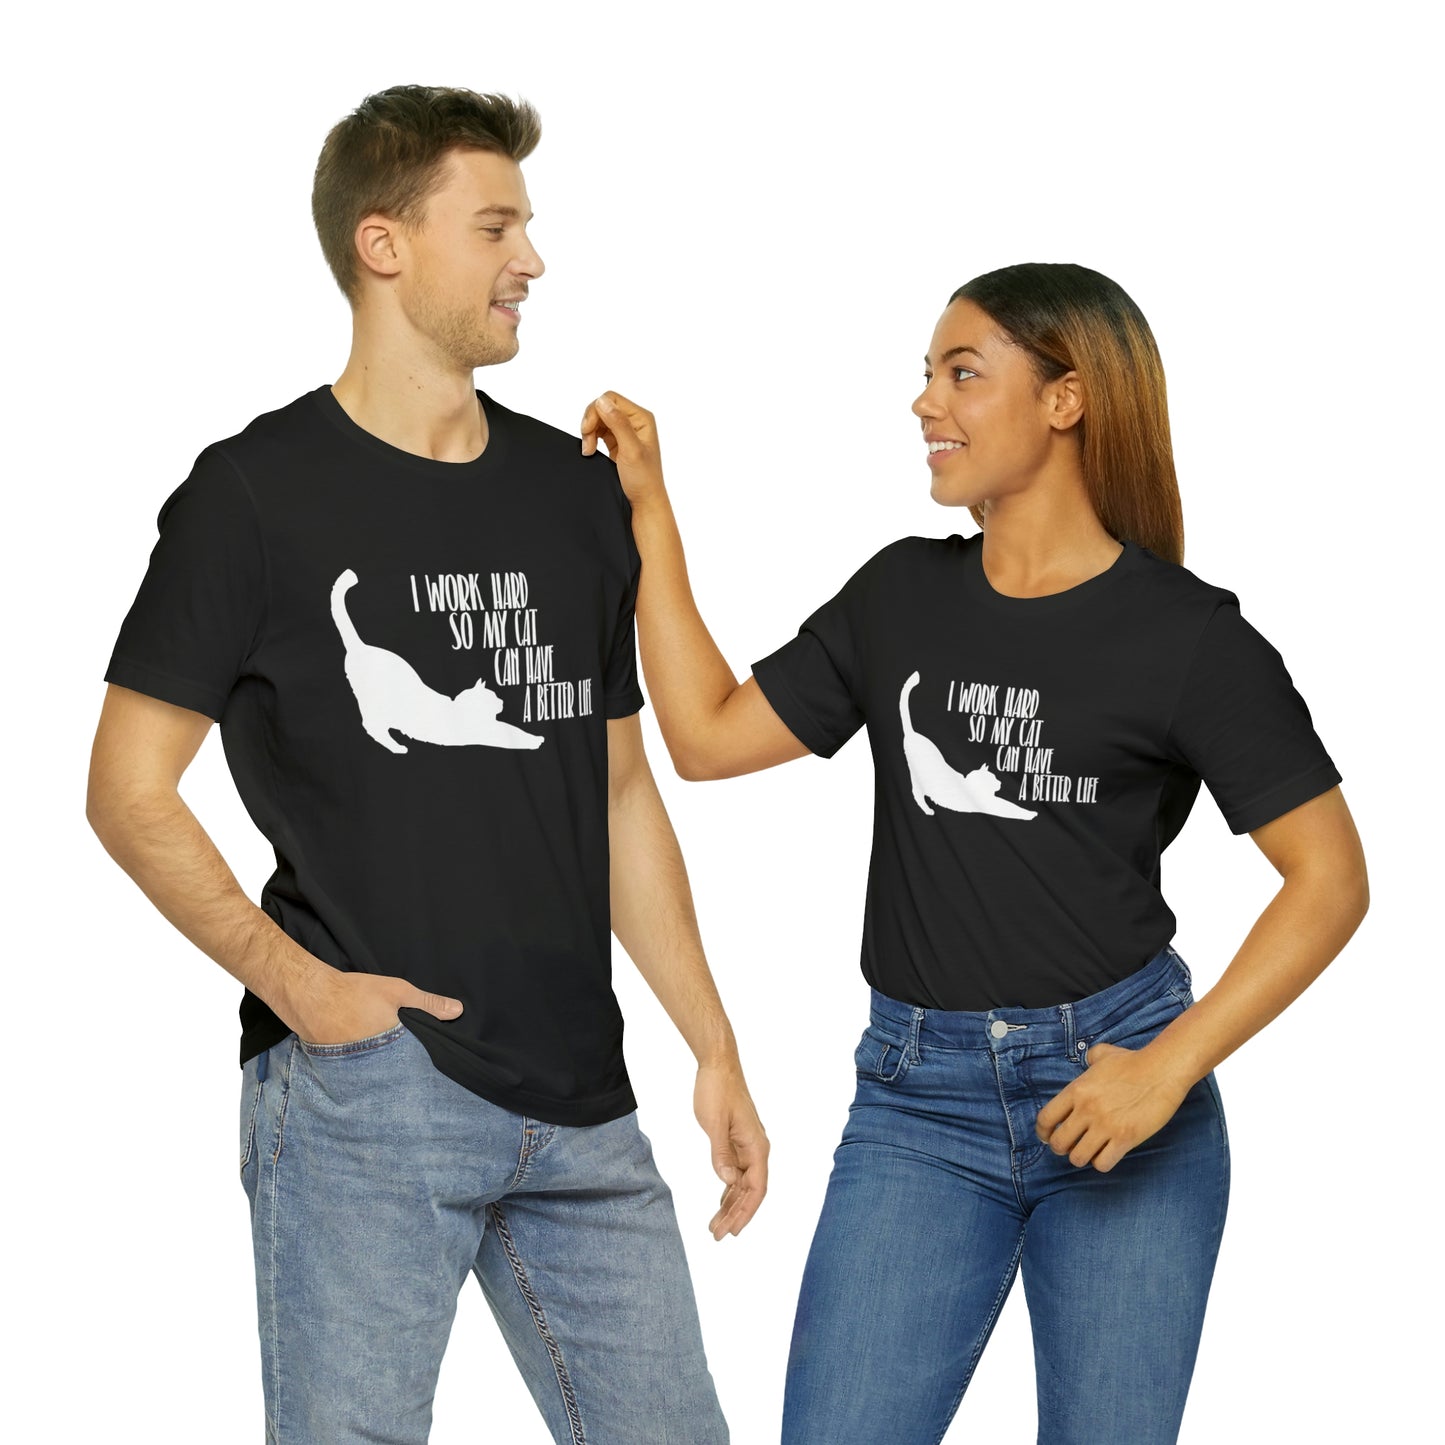 Cat Owner Quote T-shirt